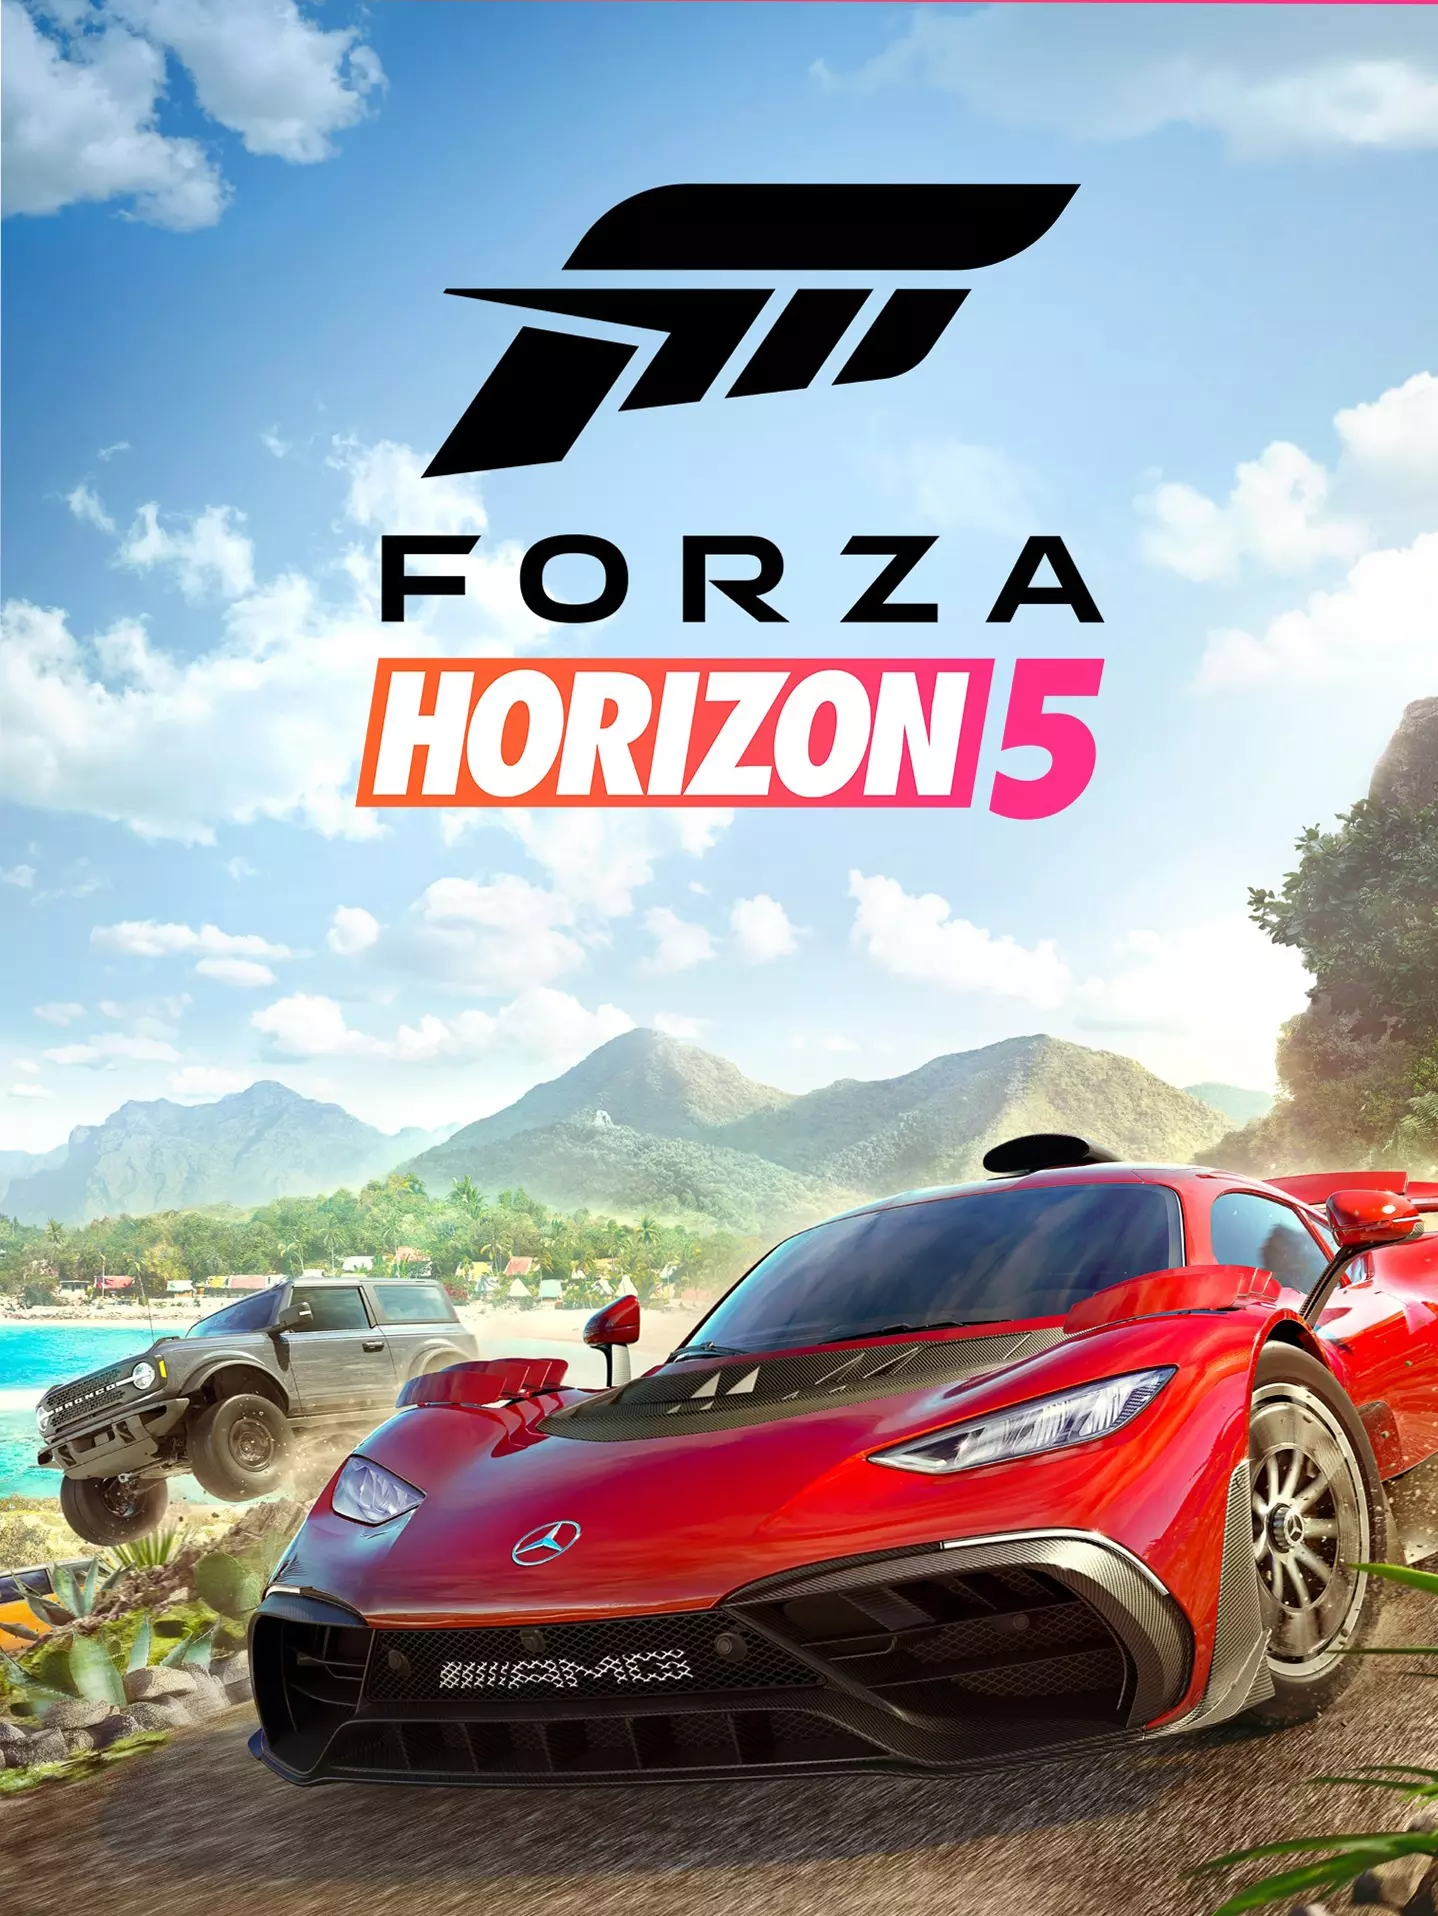 Forza Horizon 5 Deluxe (Xbox One X/S - Region Free), Platform: Xbox One X / S, Region: All Countries, Edition: Deluxe